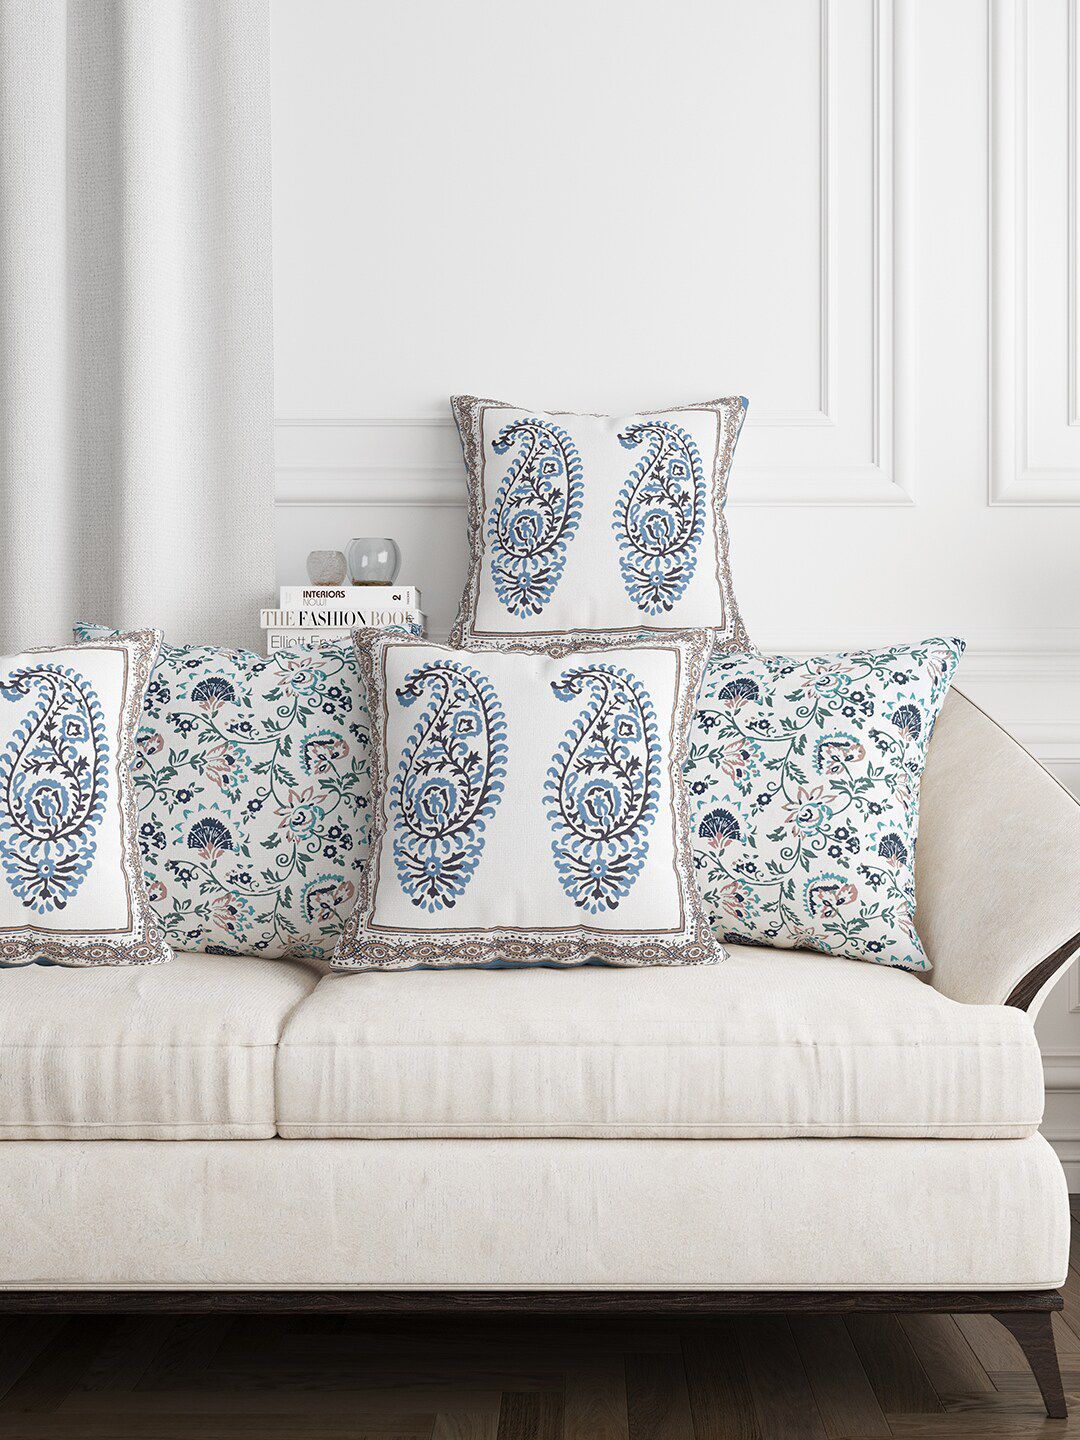 BLOCKS OF INDIA Grey & White Set of 5 Ethnic Motifs Square Cushion Covers Price in India